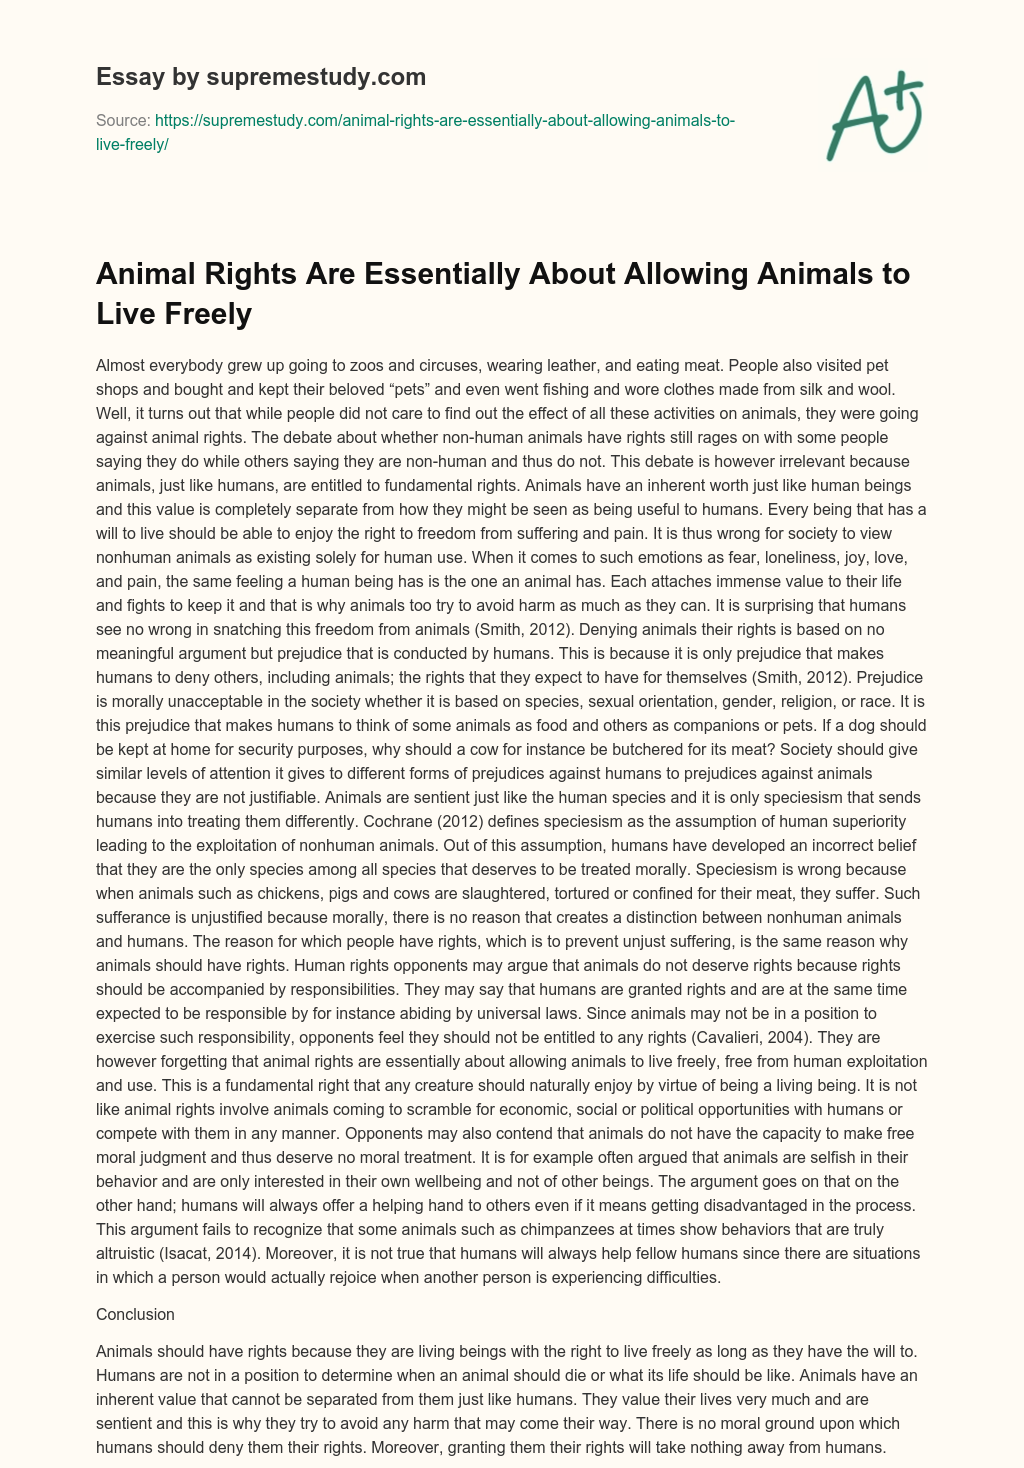 Animal Rights Are Essentially About Allowing Animals to Live Freely - Free  Essay Example - 852 Words | SupremeStudy